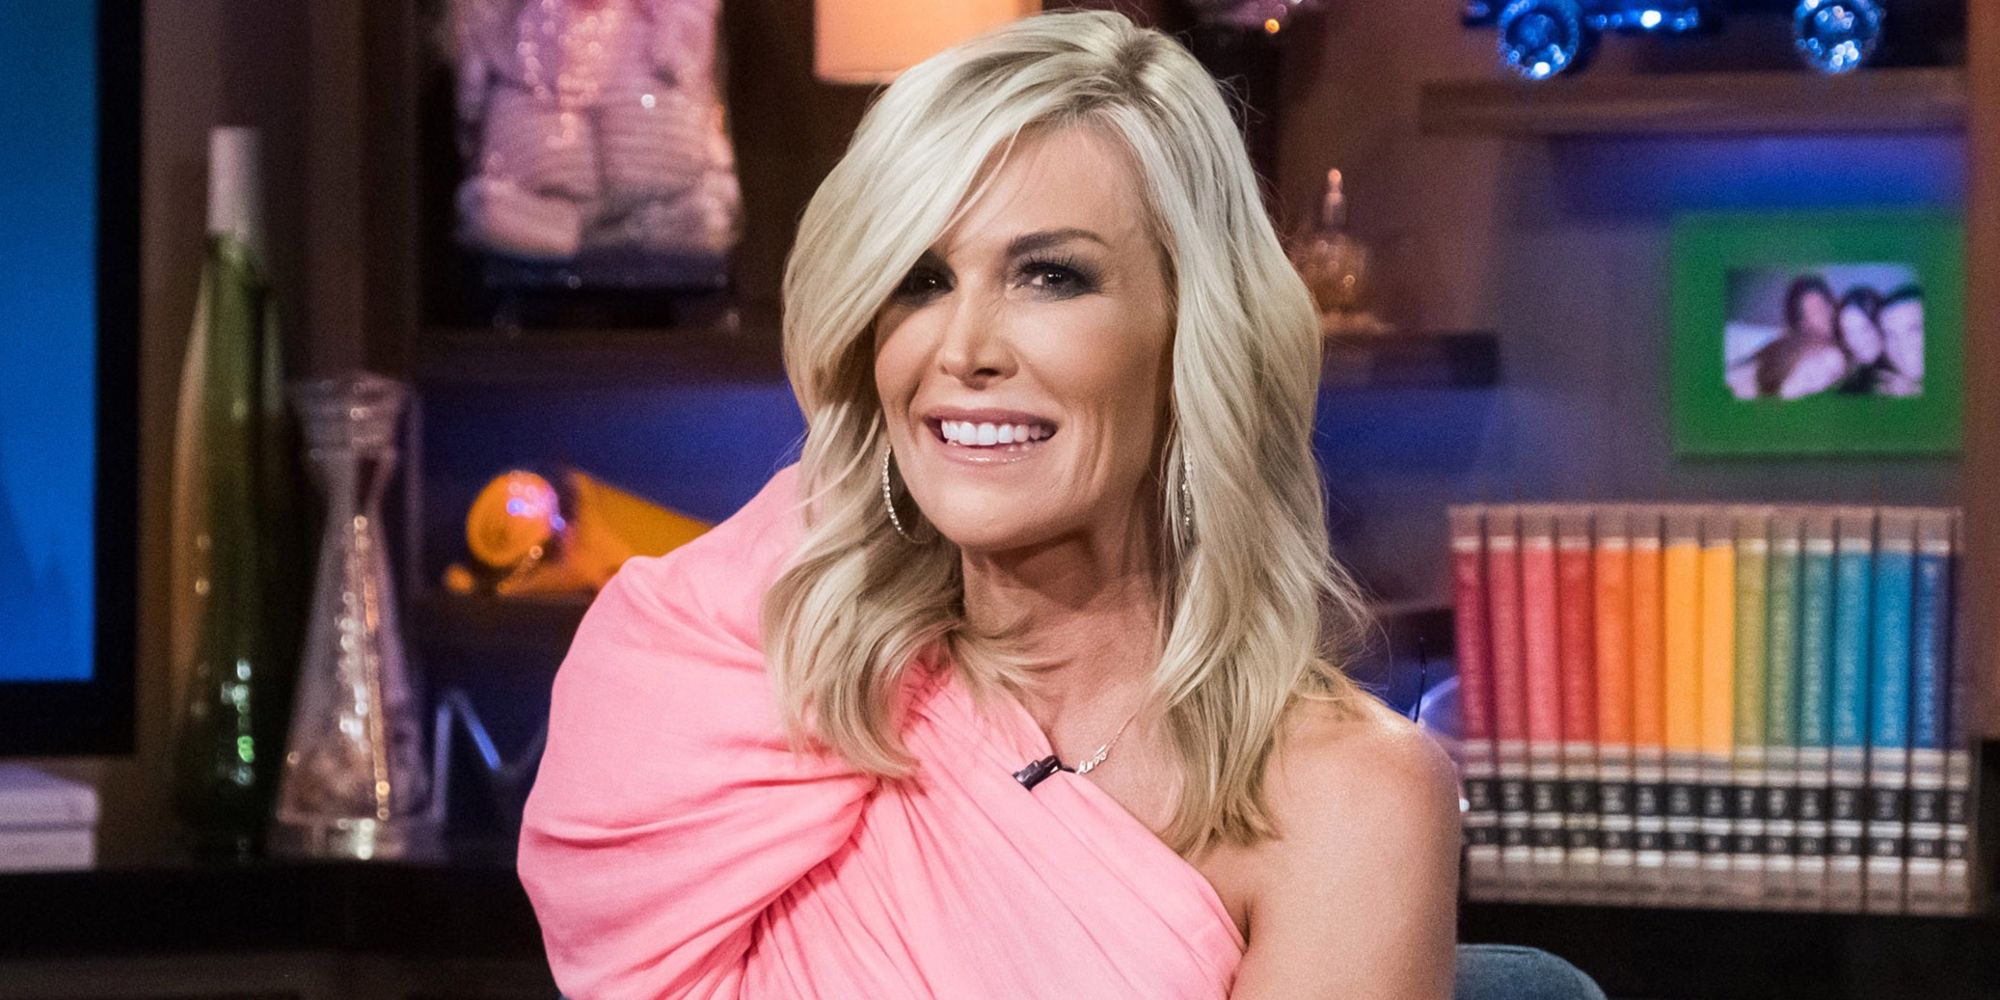 Tinsley Mortimer smiling during an appearance on WWHL